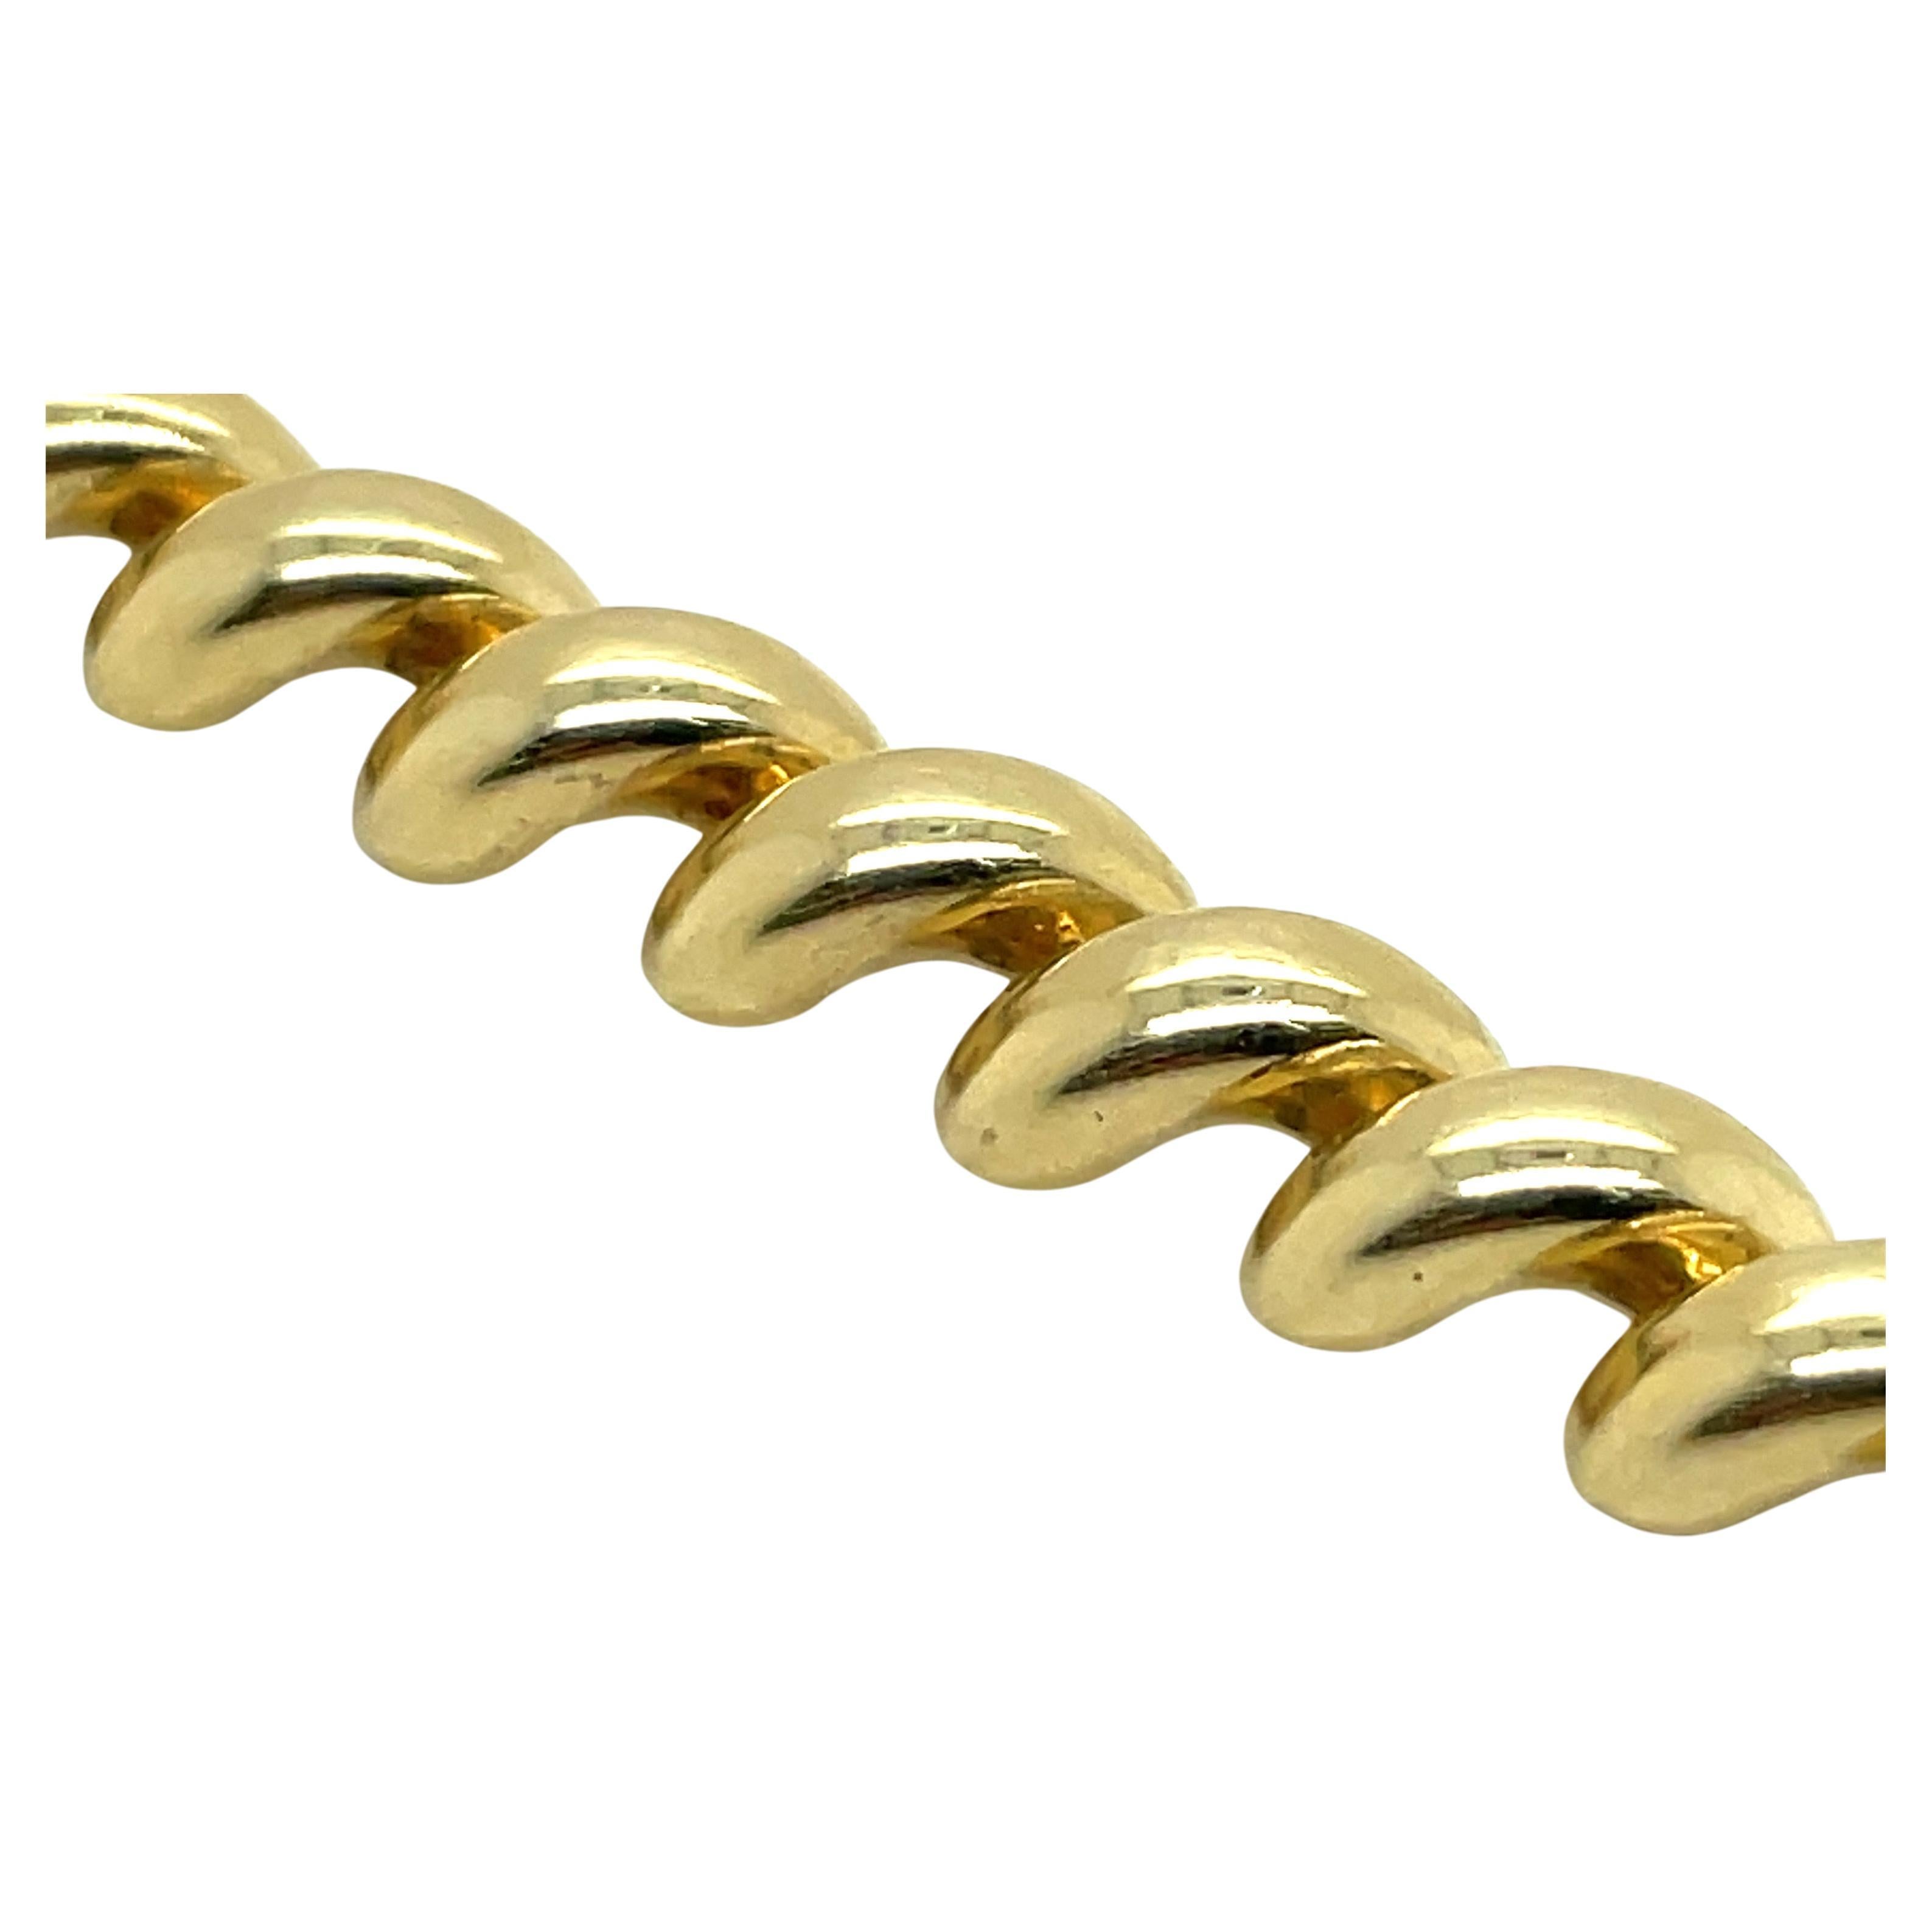 14 Karat Yellow Gold bracelet featuring San Marco links weighing 15.34 Grams, made in Italy.
More San Marco bracelets & necklaces available.
DM for prices & pricing. 